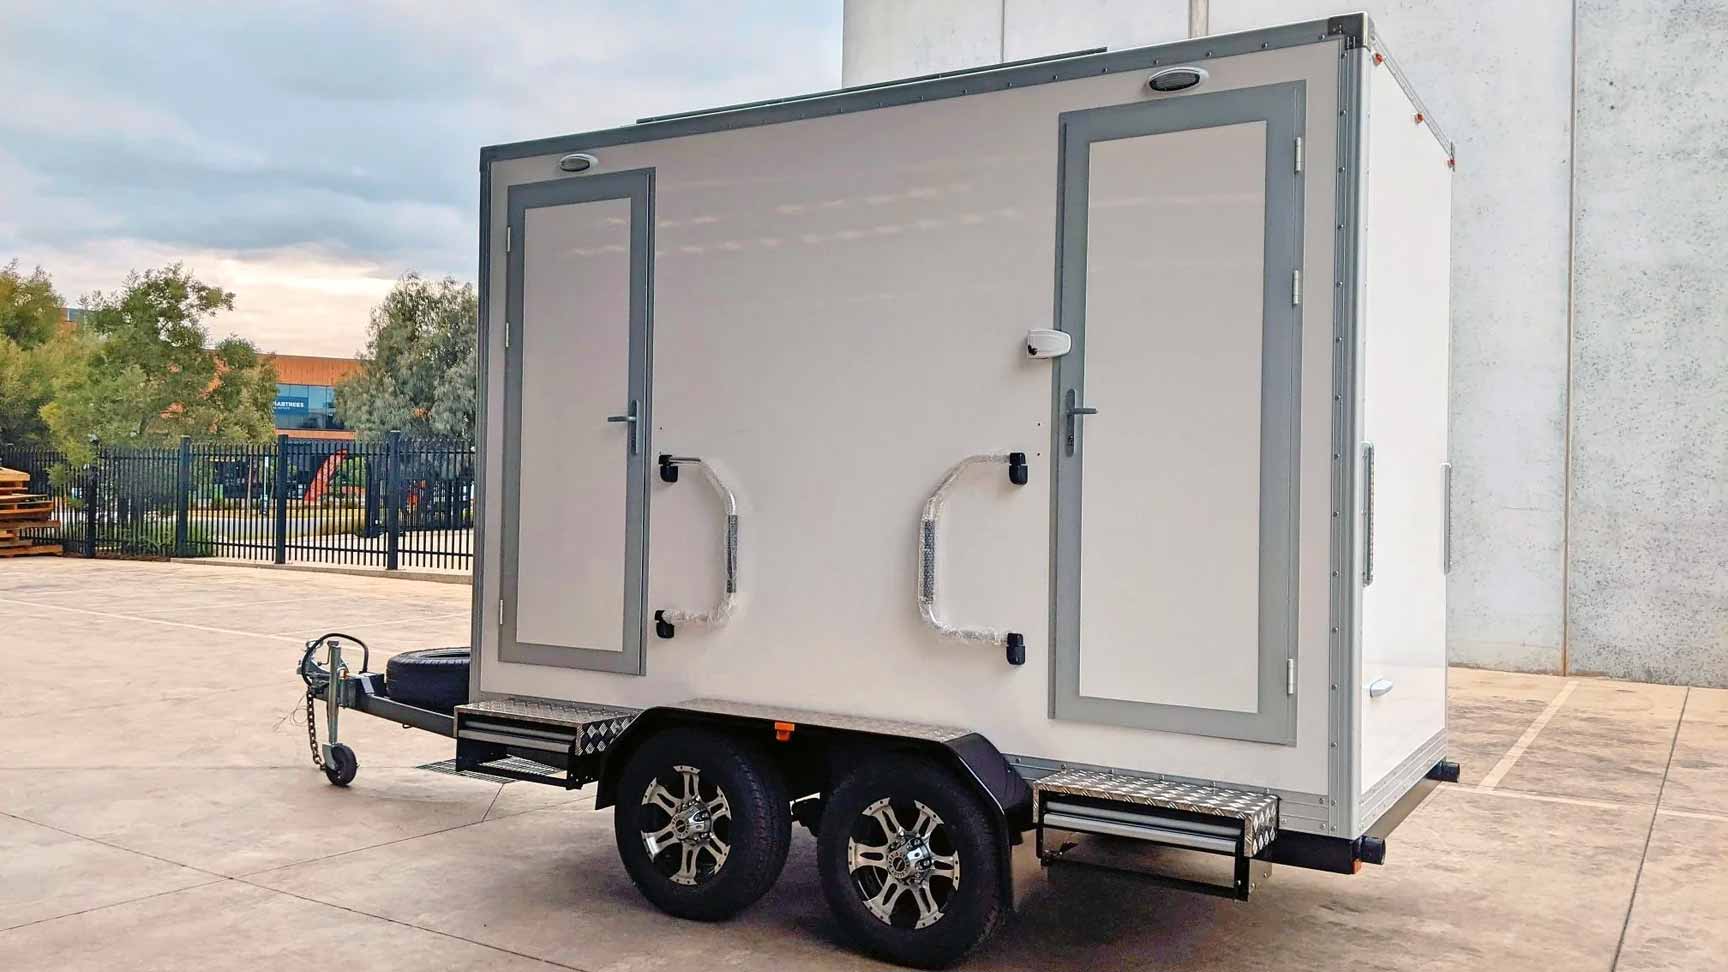 5 Reasons to Buy a LUXURY Portable Toilet